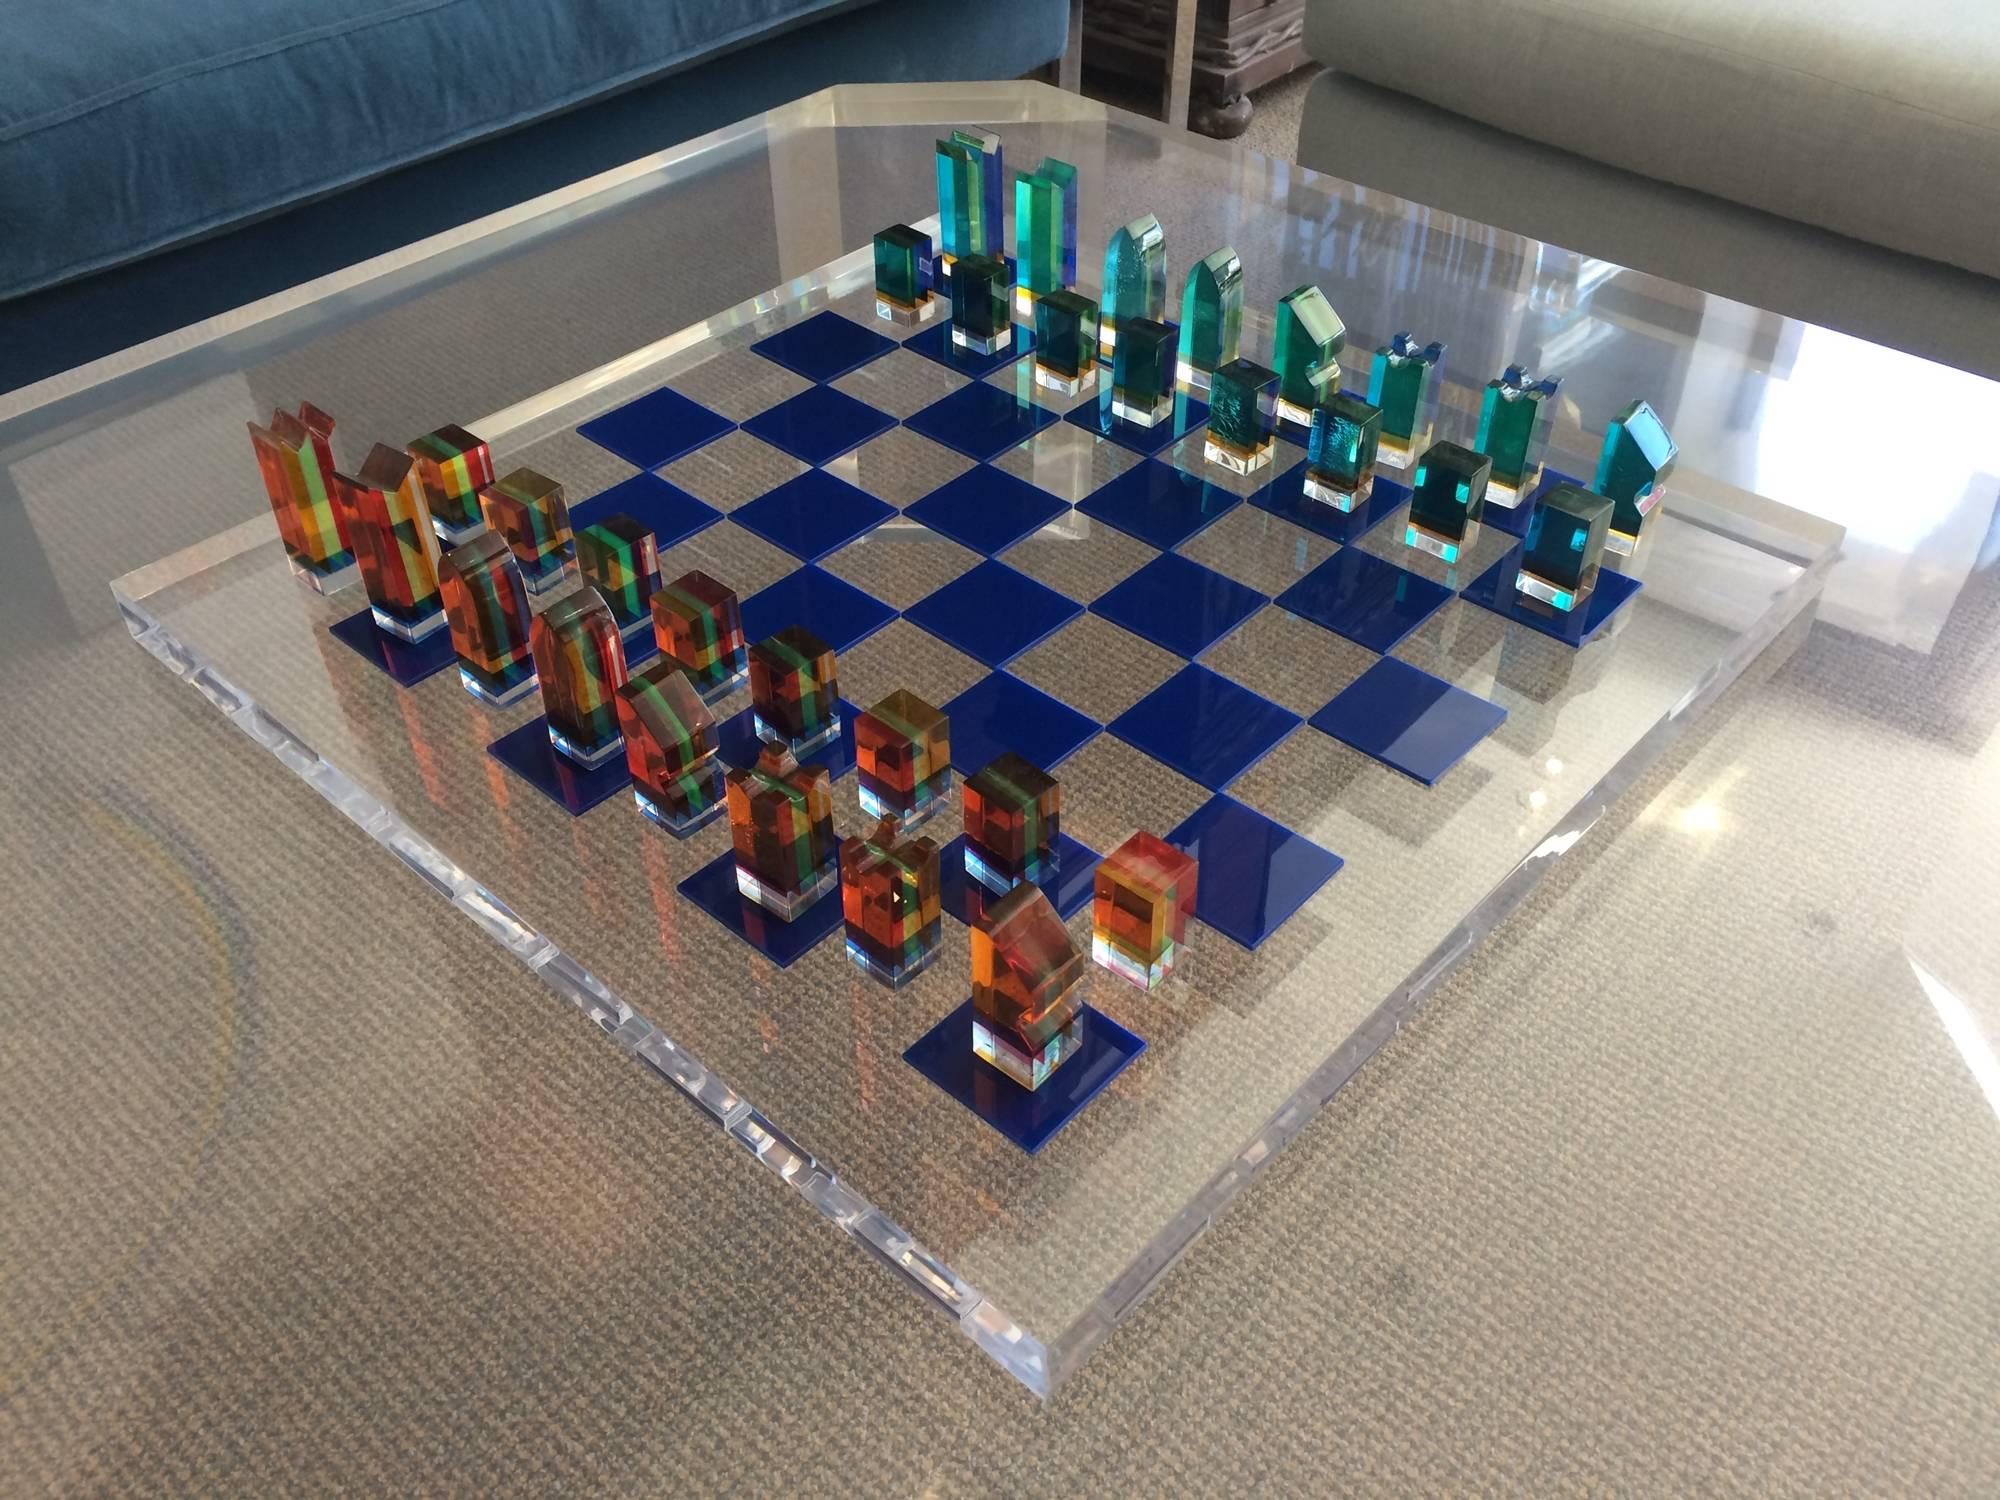 Stunning chess set designed by the Lucite master, Charles Hollis Jones.
The set is from the mid-1960s and is in very good original condition, the board has a few surface scratches and the pieces have a little crazing due to age and use.
There us